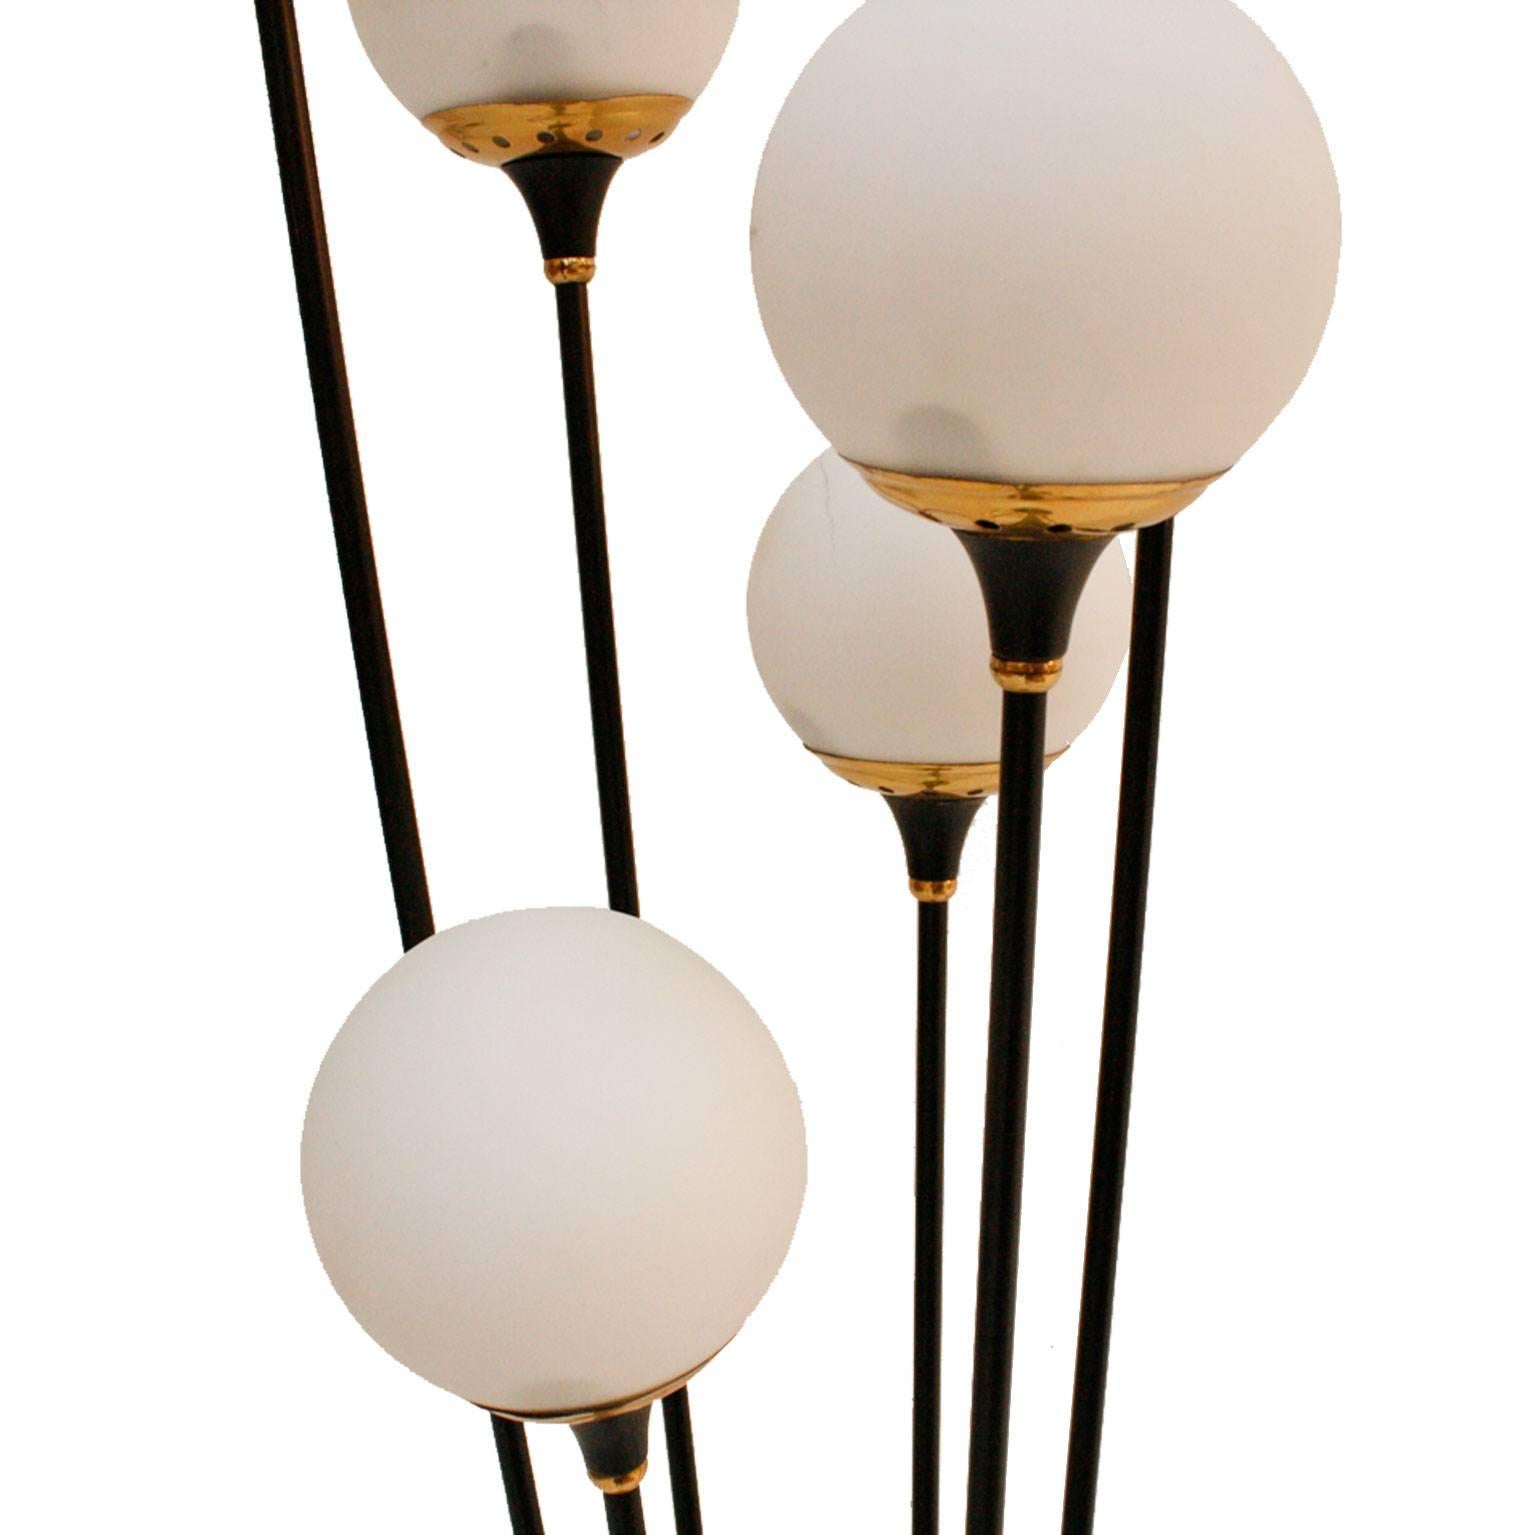 Floor lamp designed by Stilnovo, consisting in six points of light with structure made in black lacquered iron with brass finishes and marble base.